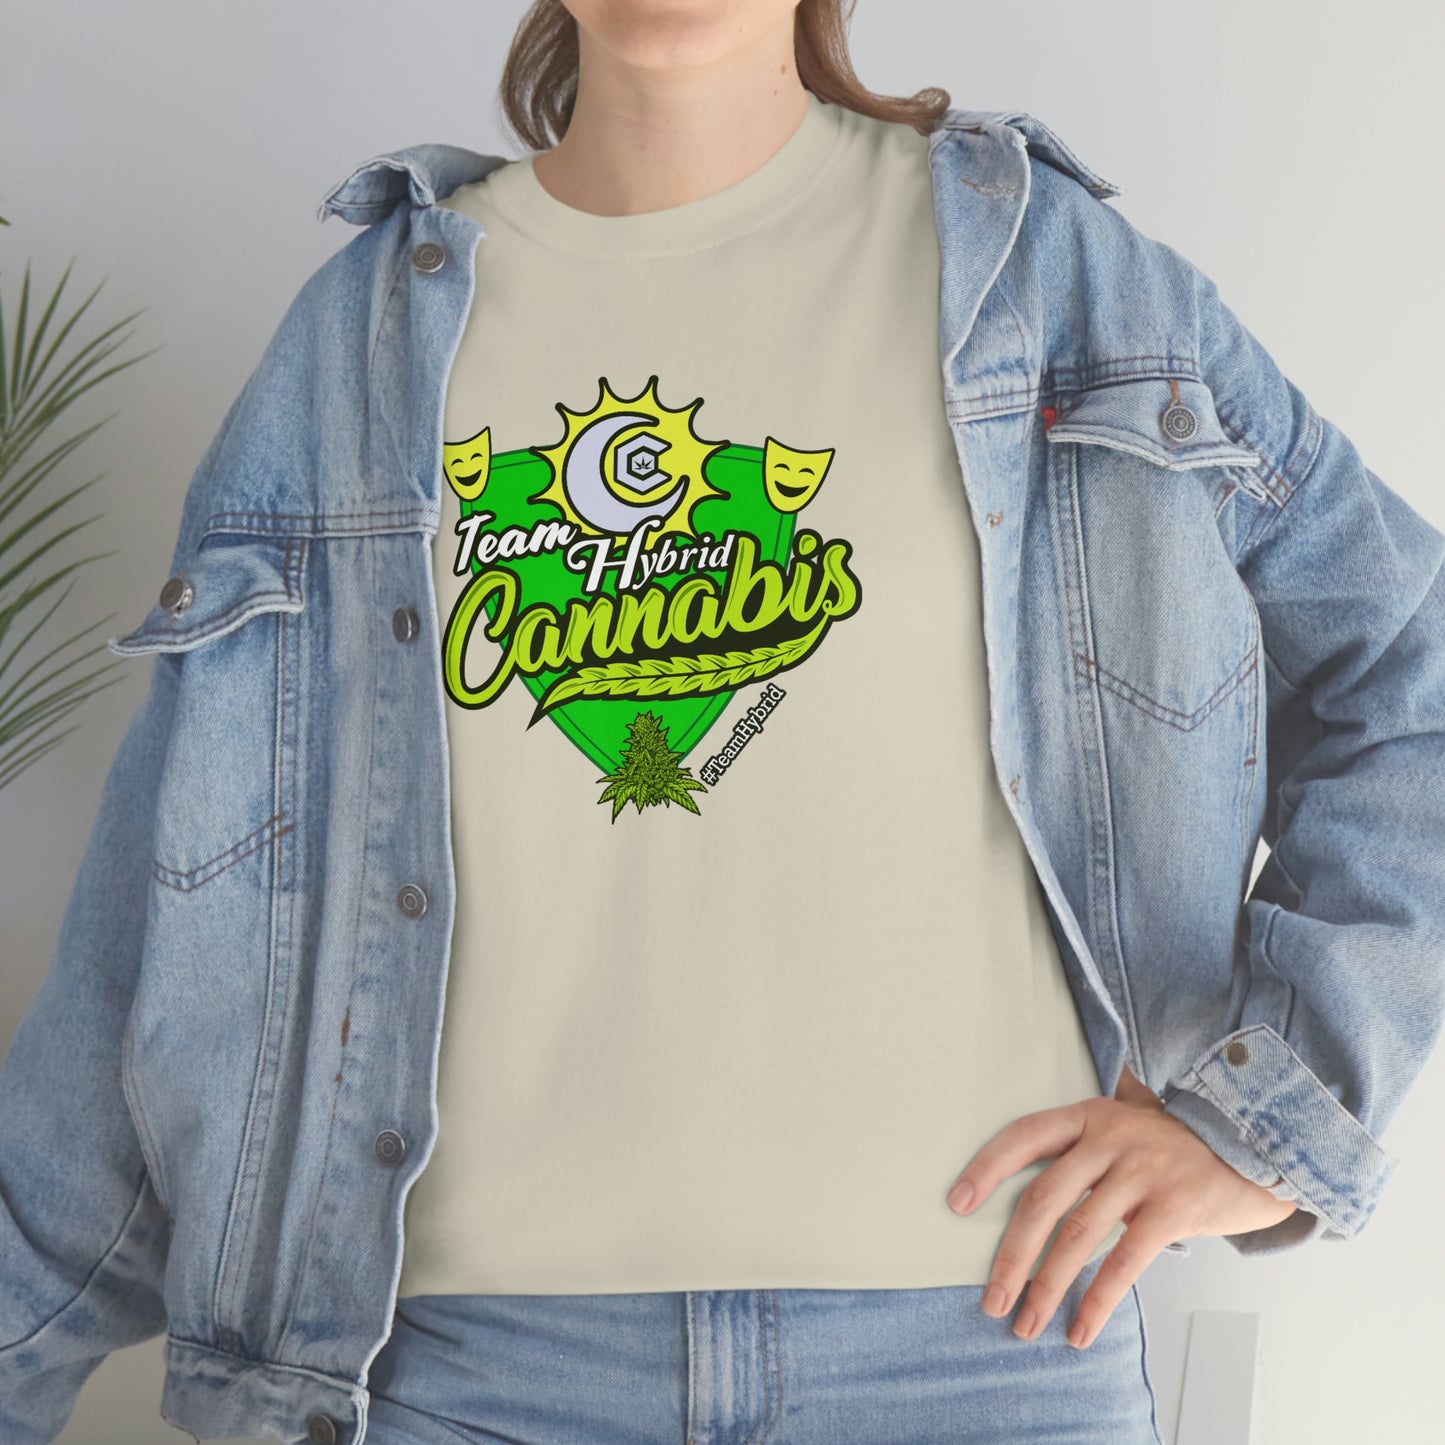 a woman wearing jeans and a Team Hybrid Cannabis T-Shirt.